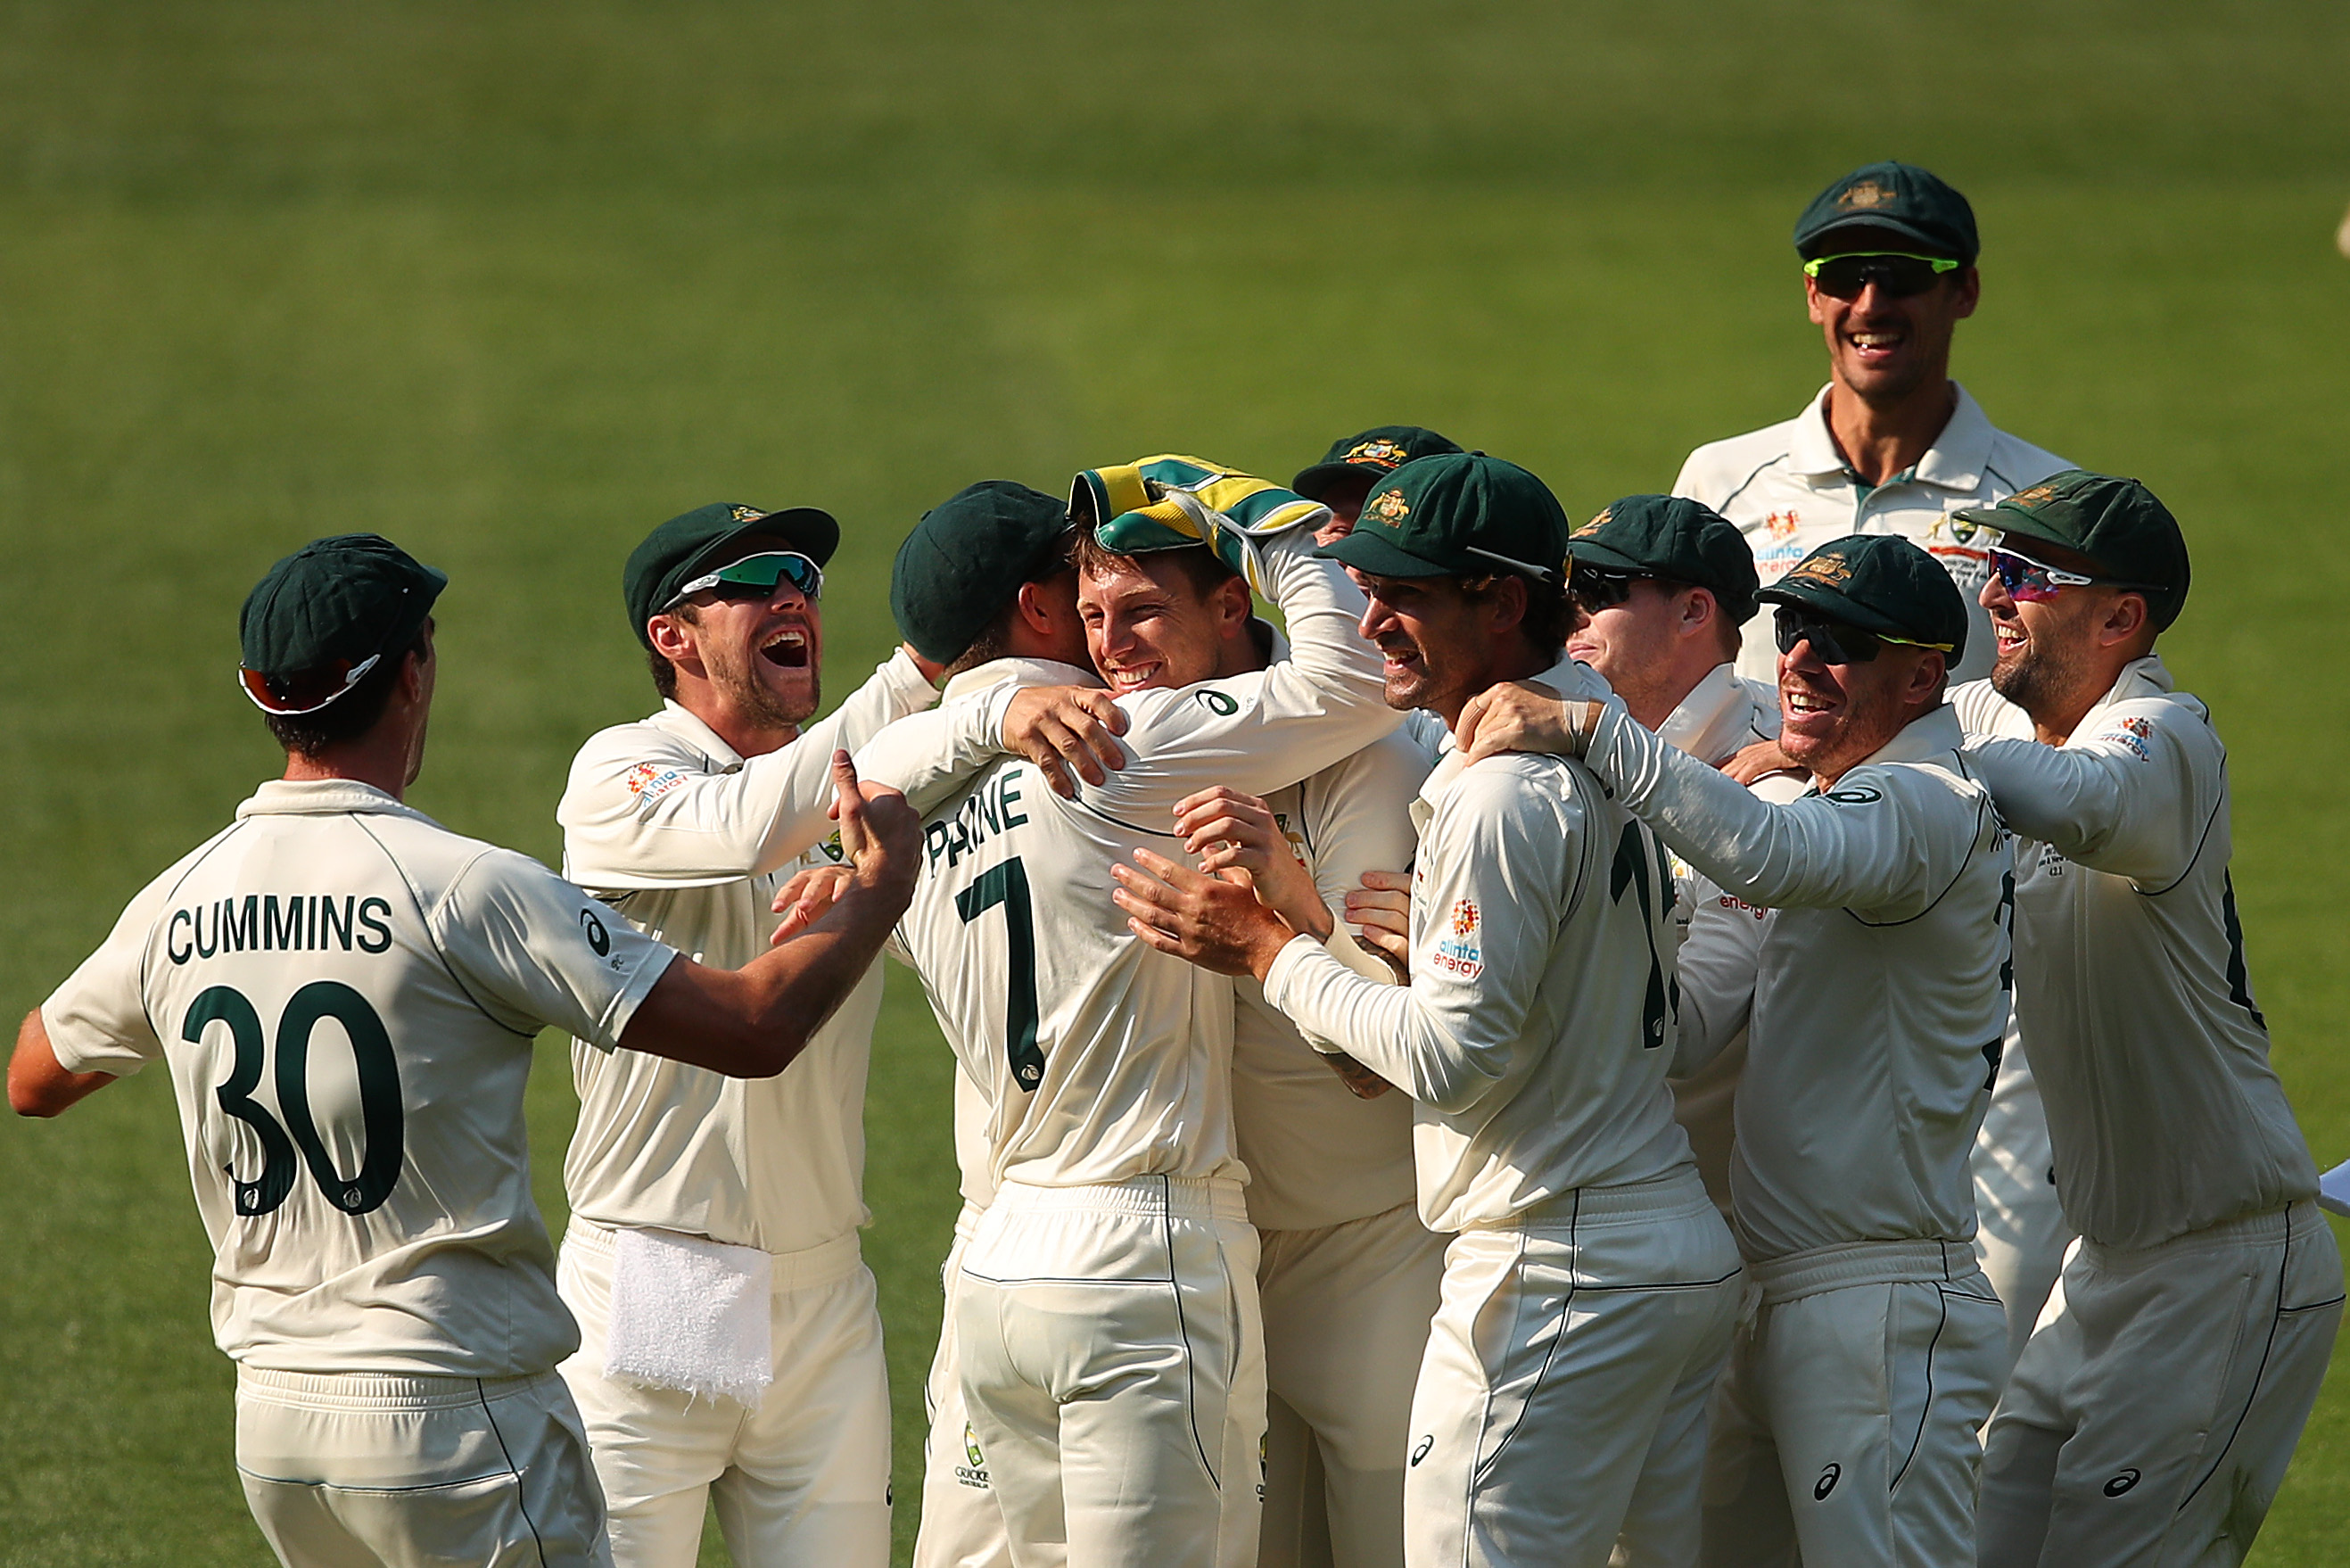 Cricket-Australia declare second innings, New Zealand chase 416